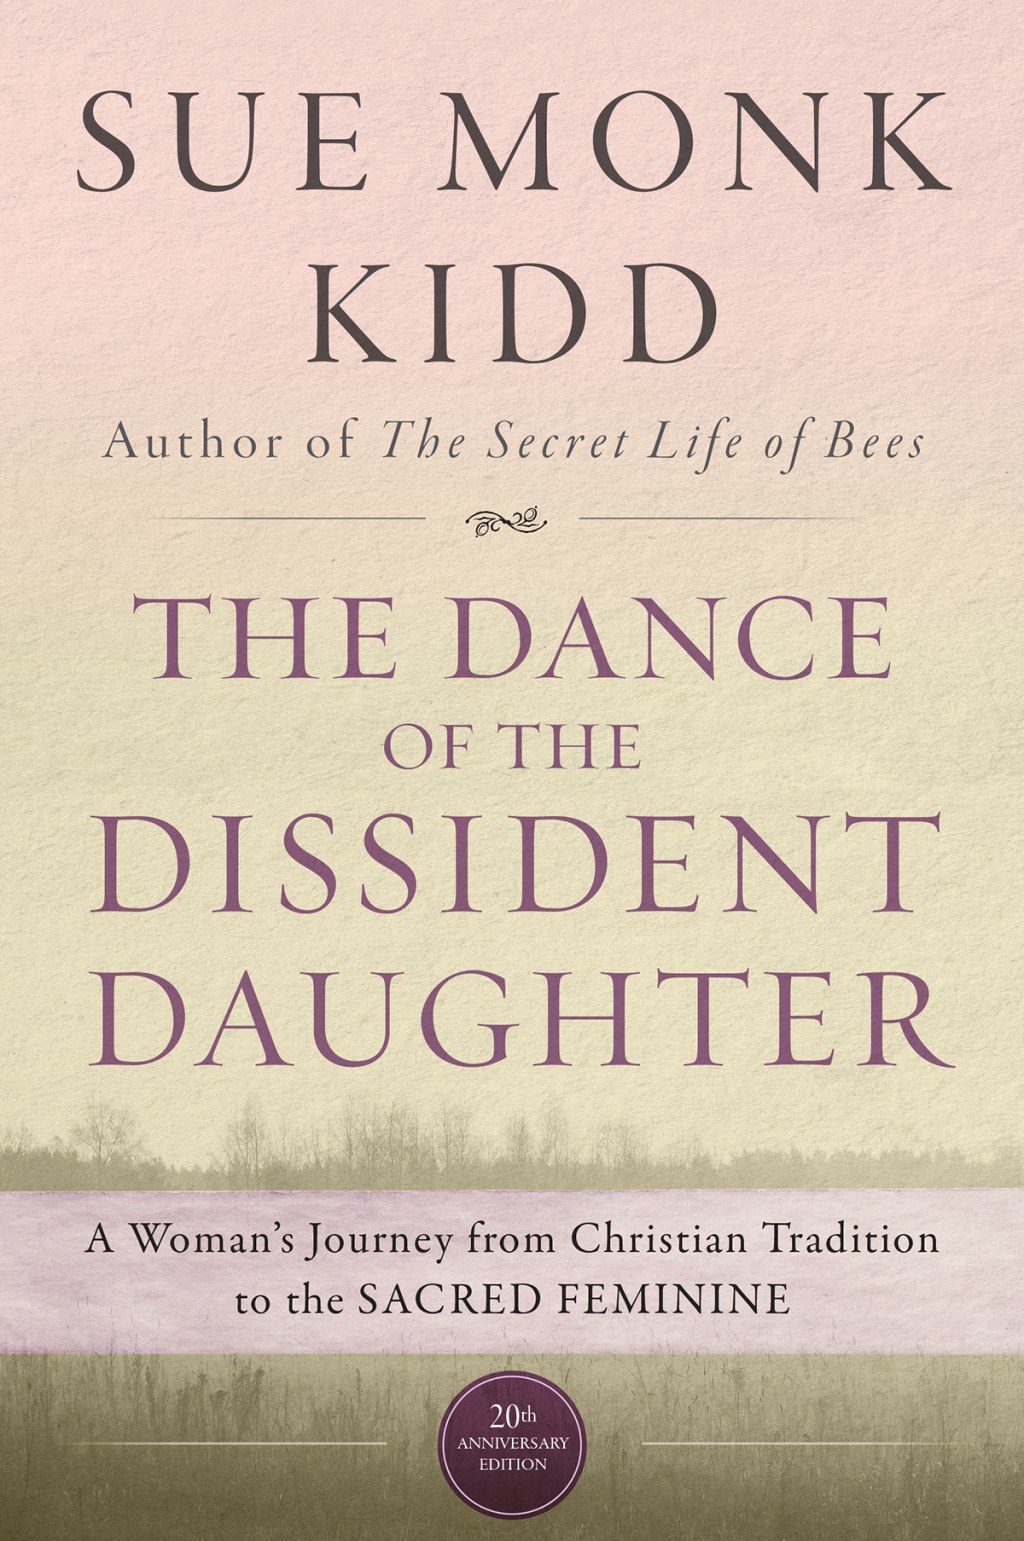 Picture of: The Dance of the Dissident Daughter – Sue Monk Kidd